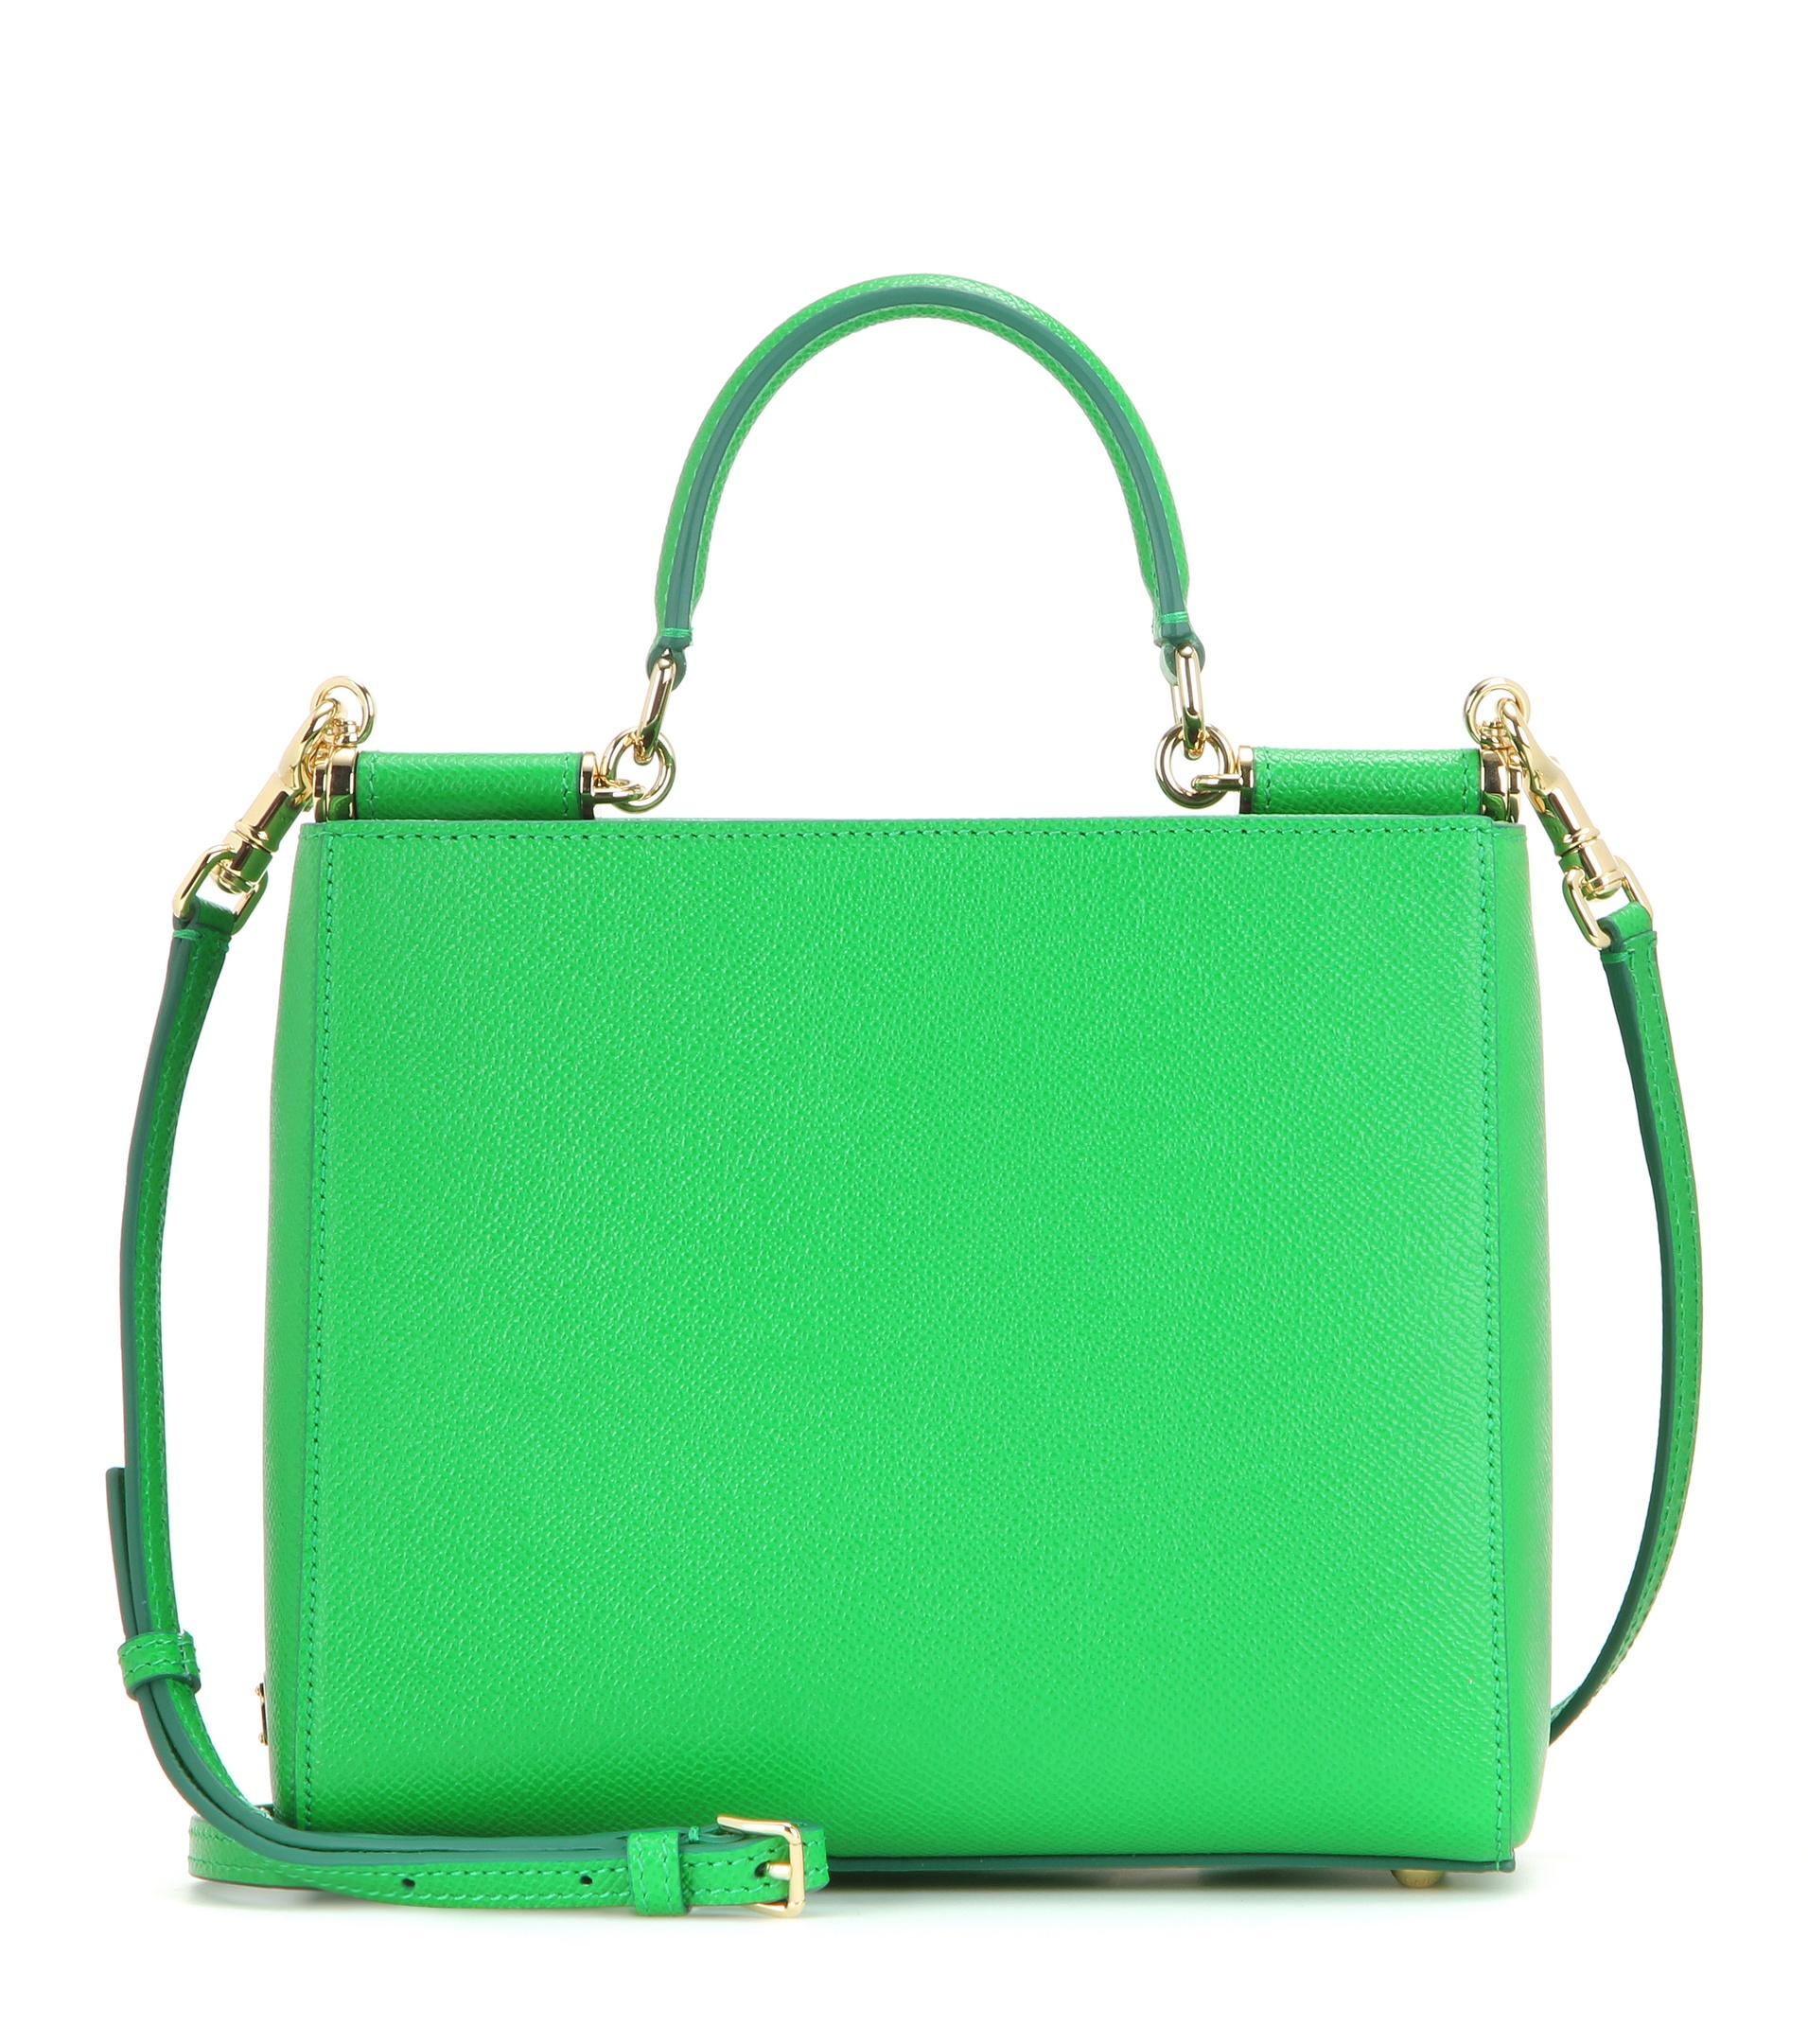 Dolce & gabbana Sicily Small Leather Shoulder Bag in Green | Lyst